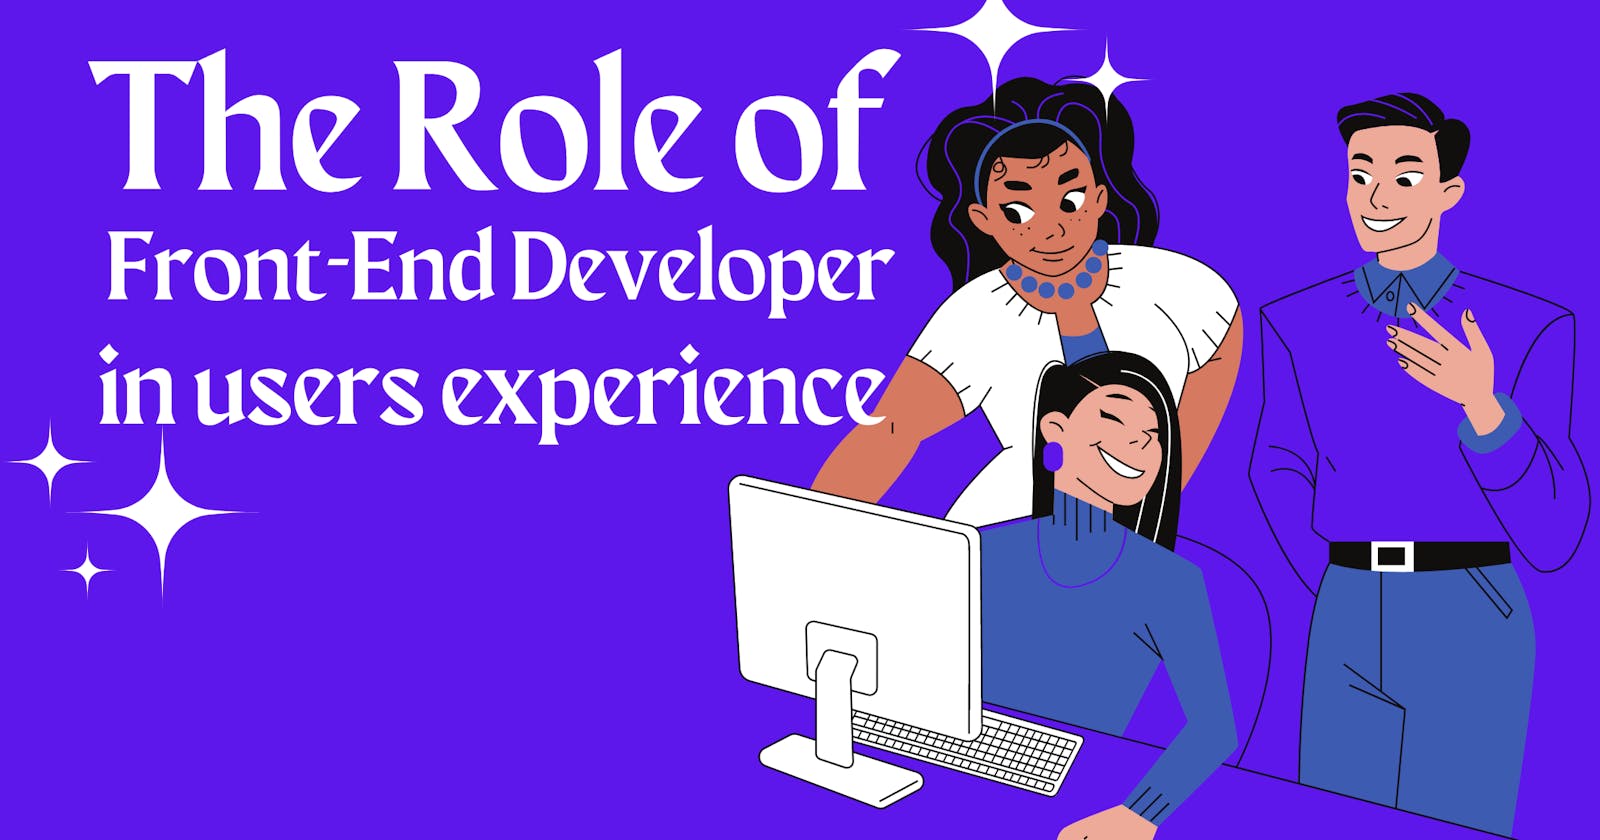 Do you know the role of a front-end developer in the user's experience?